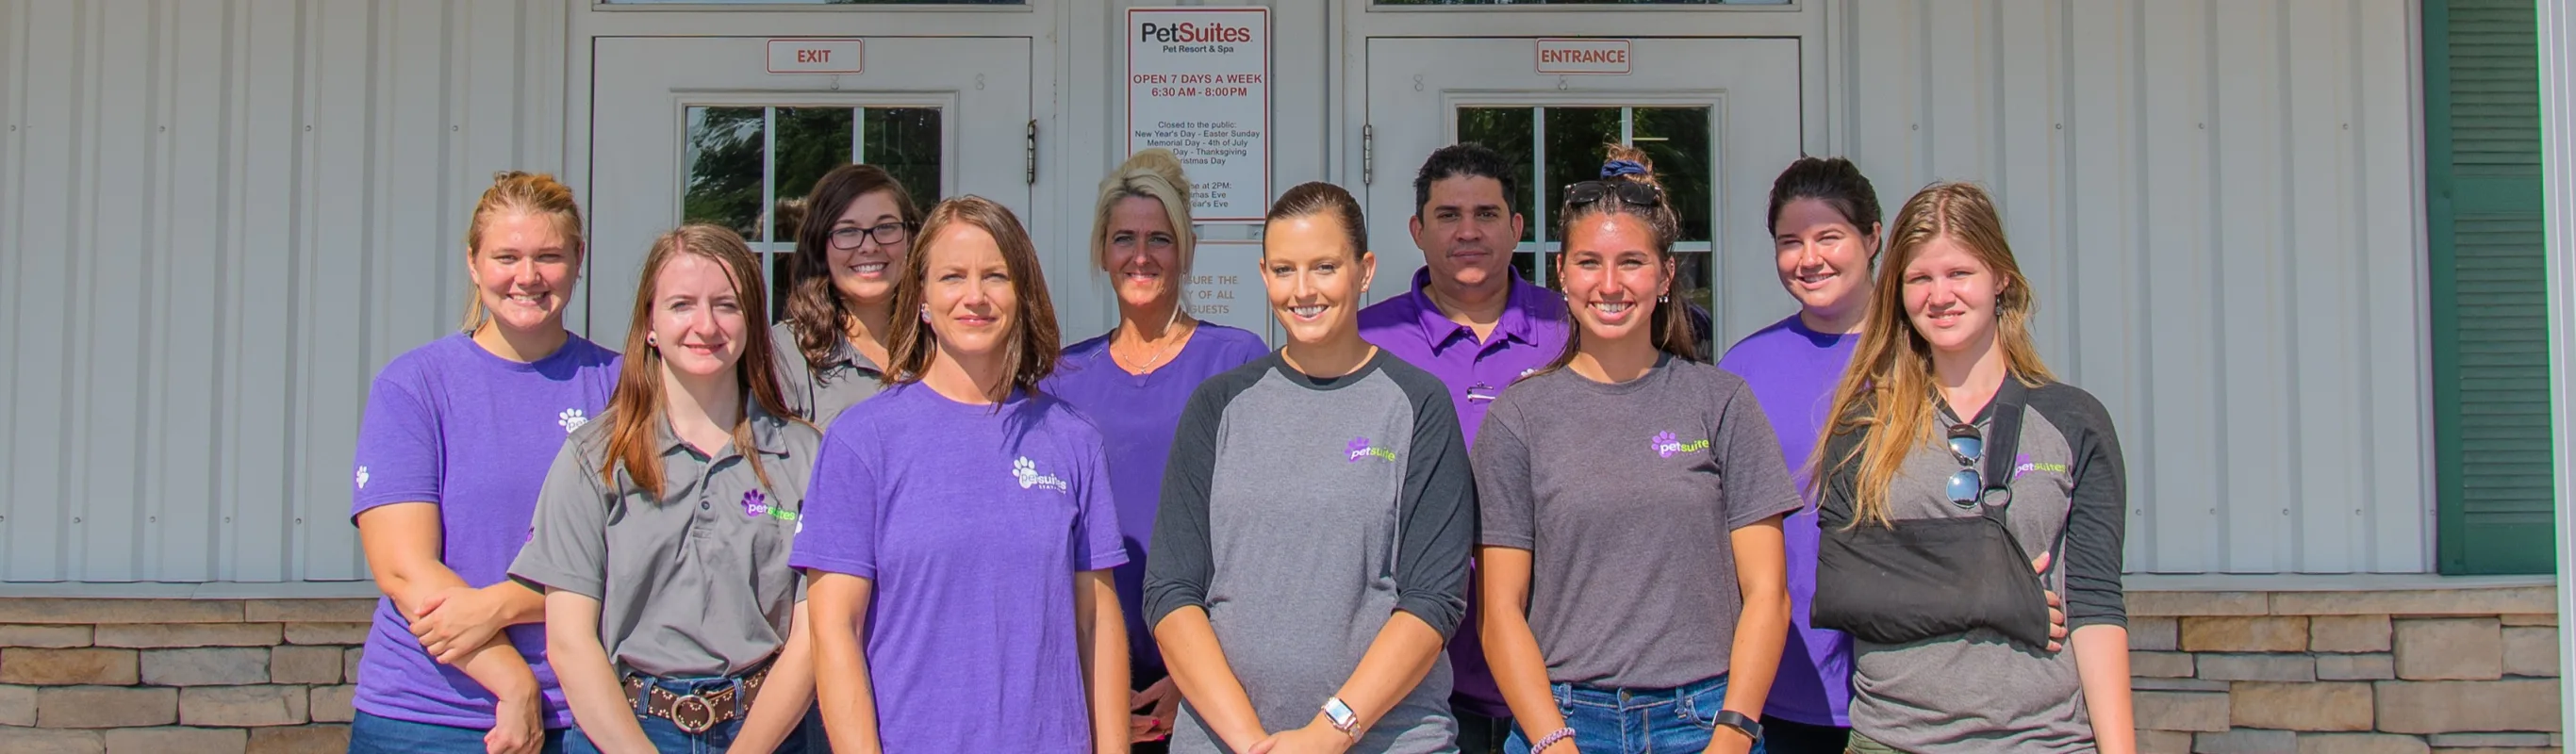 PetSuites Fishers staff